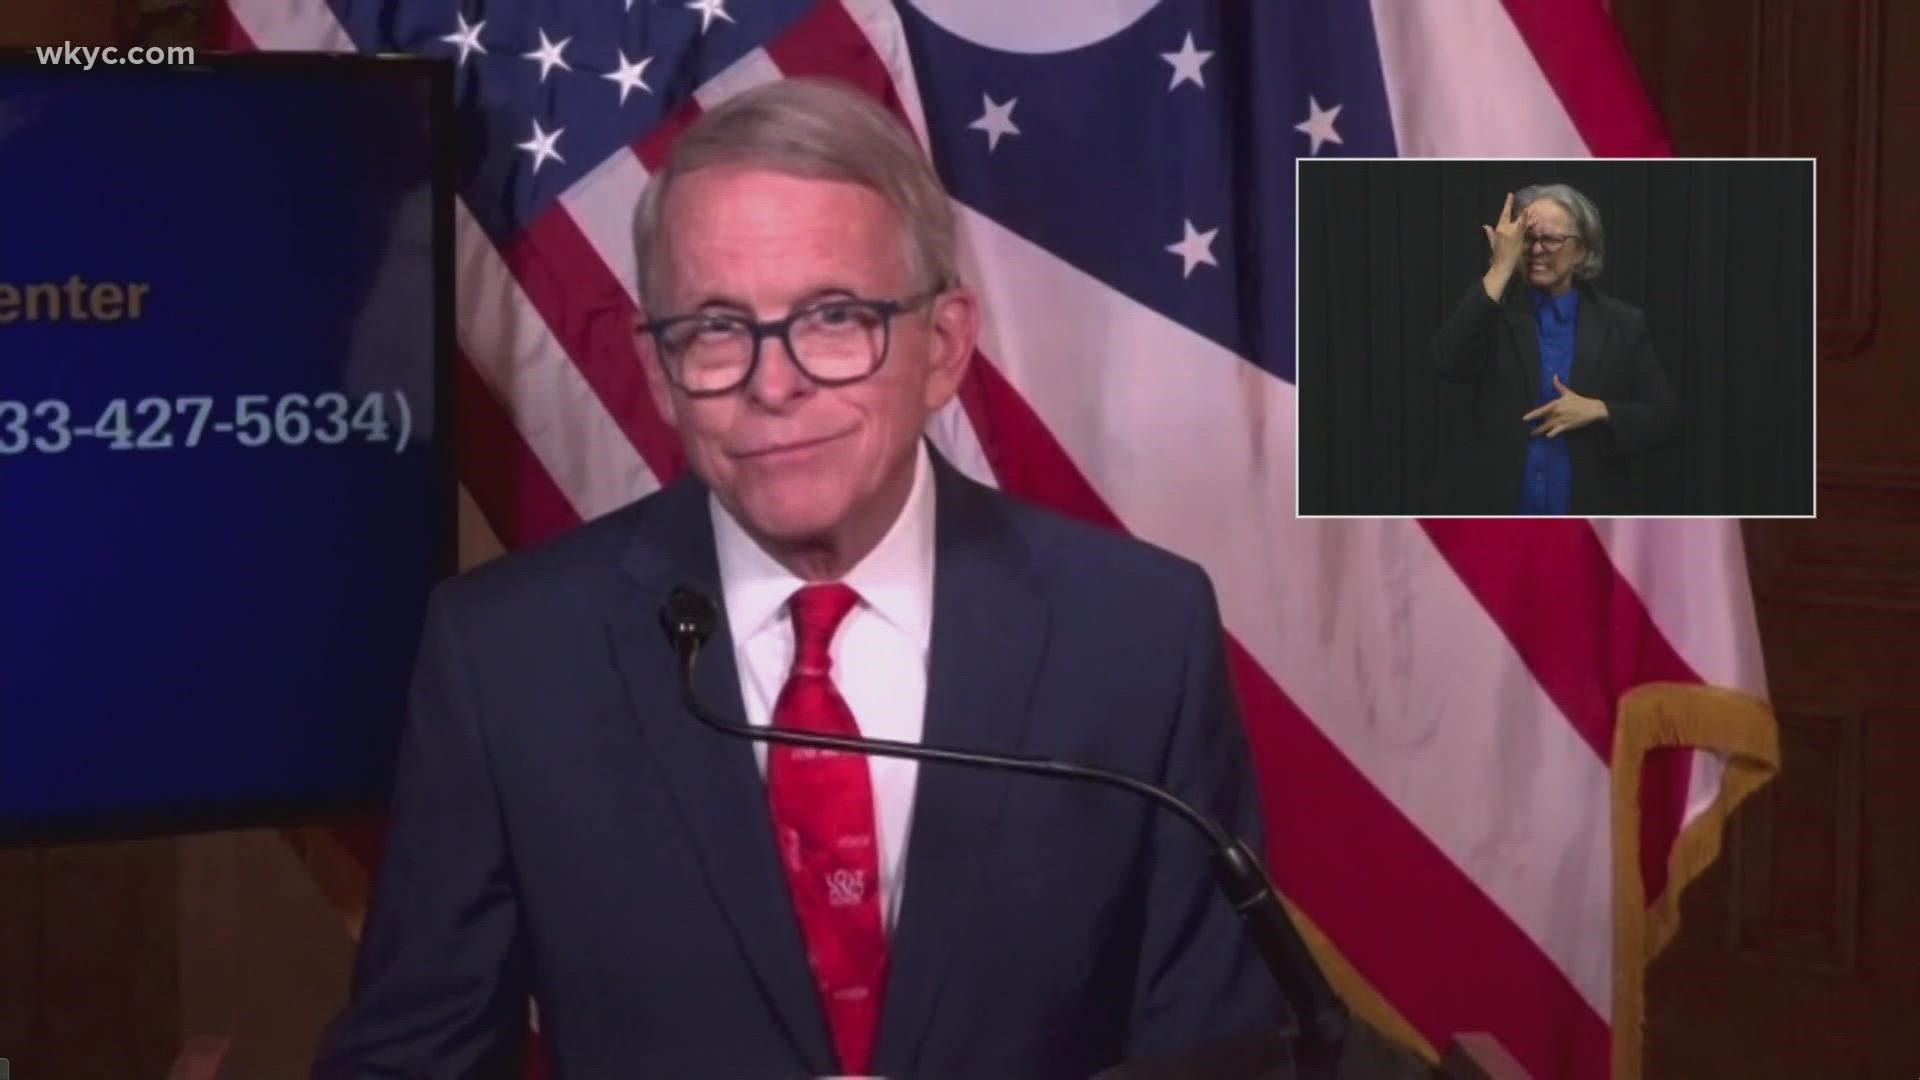 DeWine says the best way to prevent your kids from missing school is to send them to school with a mask. If they are over 12, get them vaccinated.